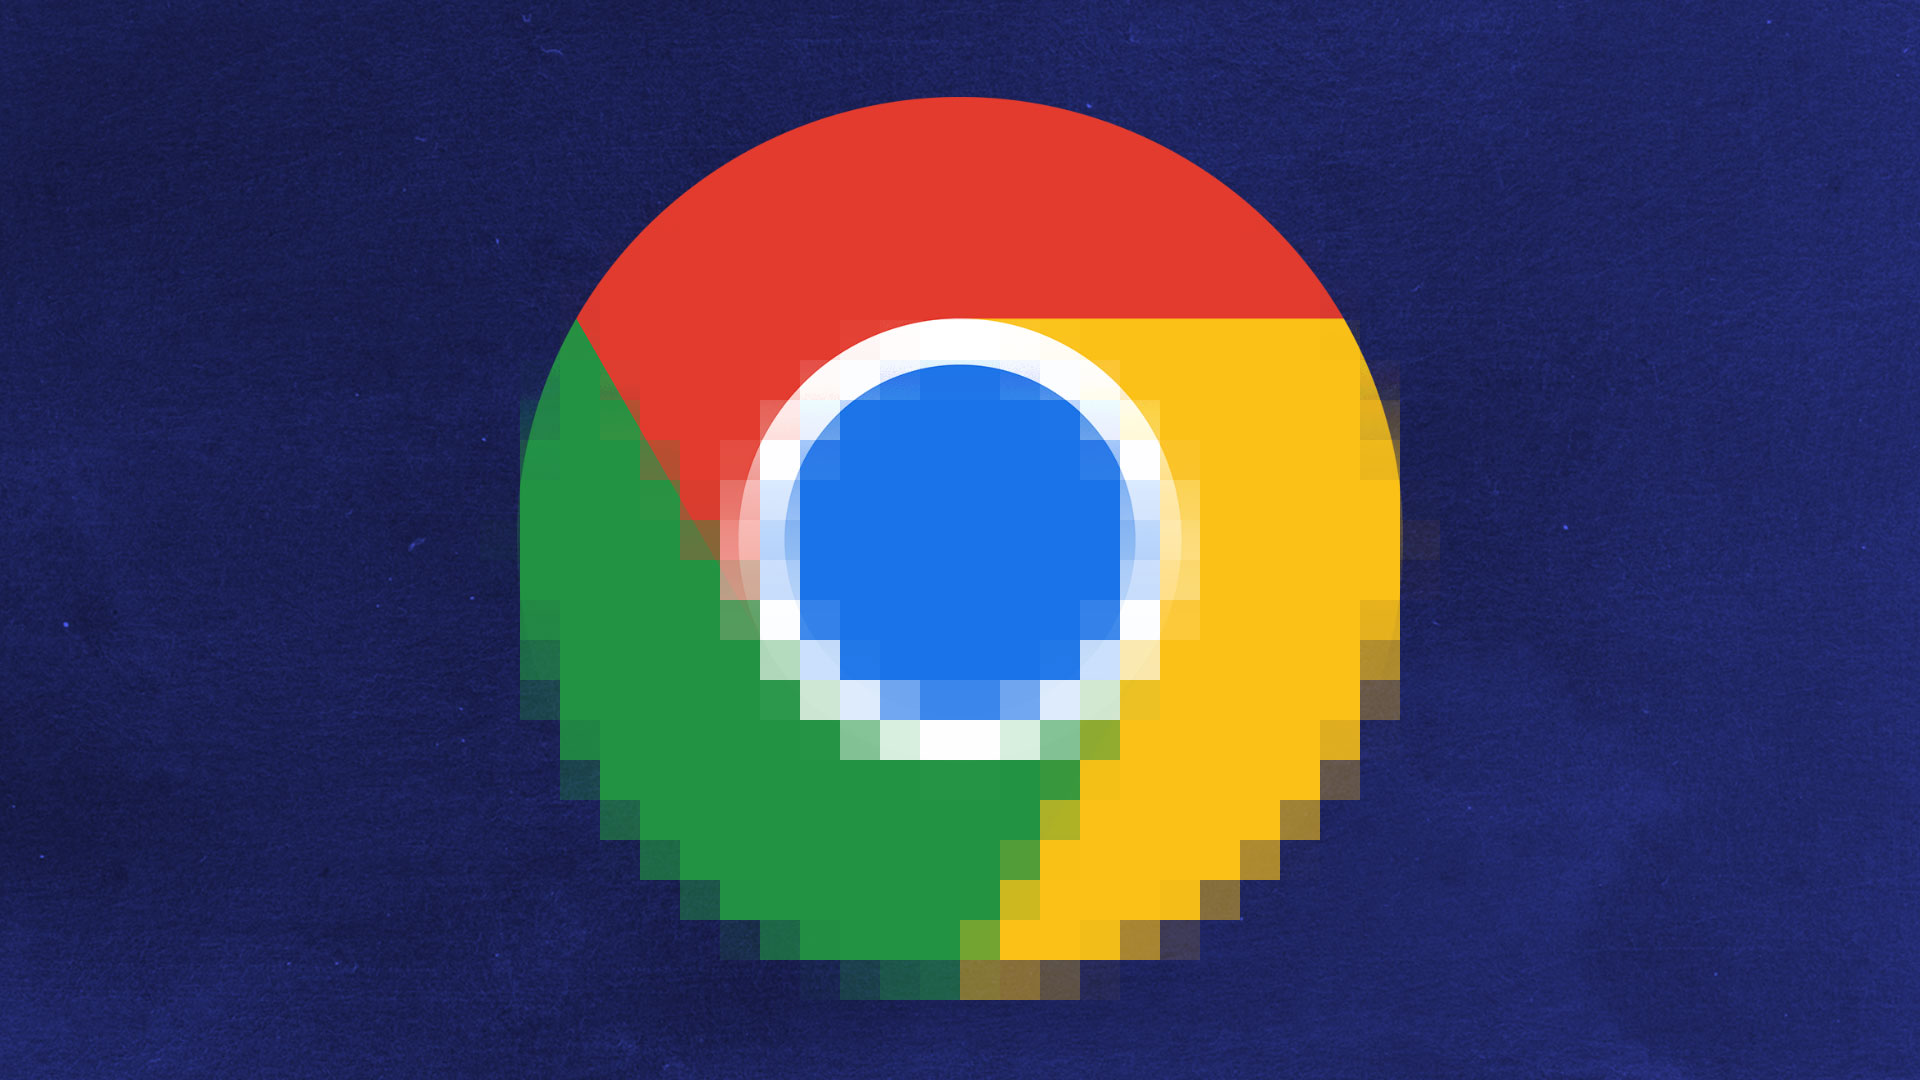 FSF: Chrome’s JPEG XL killing shows how the web works under browser hegemony